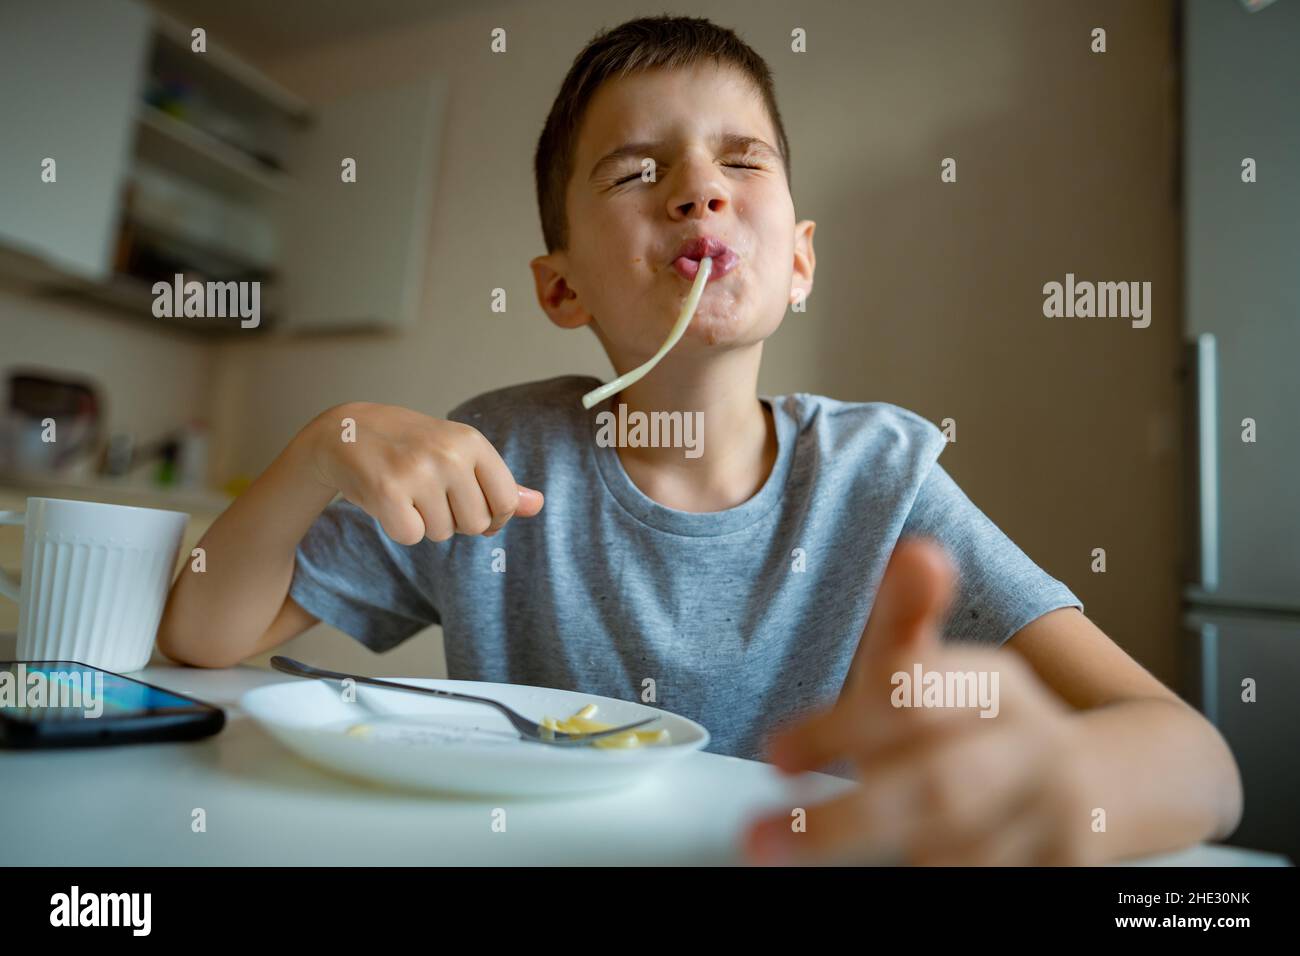 Boy, child eating macaroni, retraction long pasta into his mouth Stock Photo